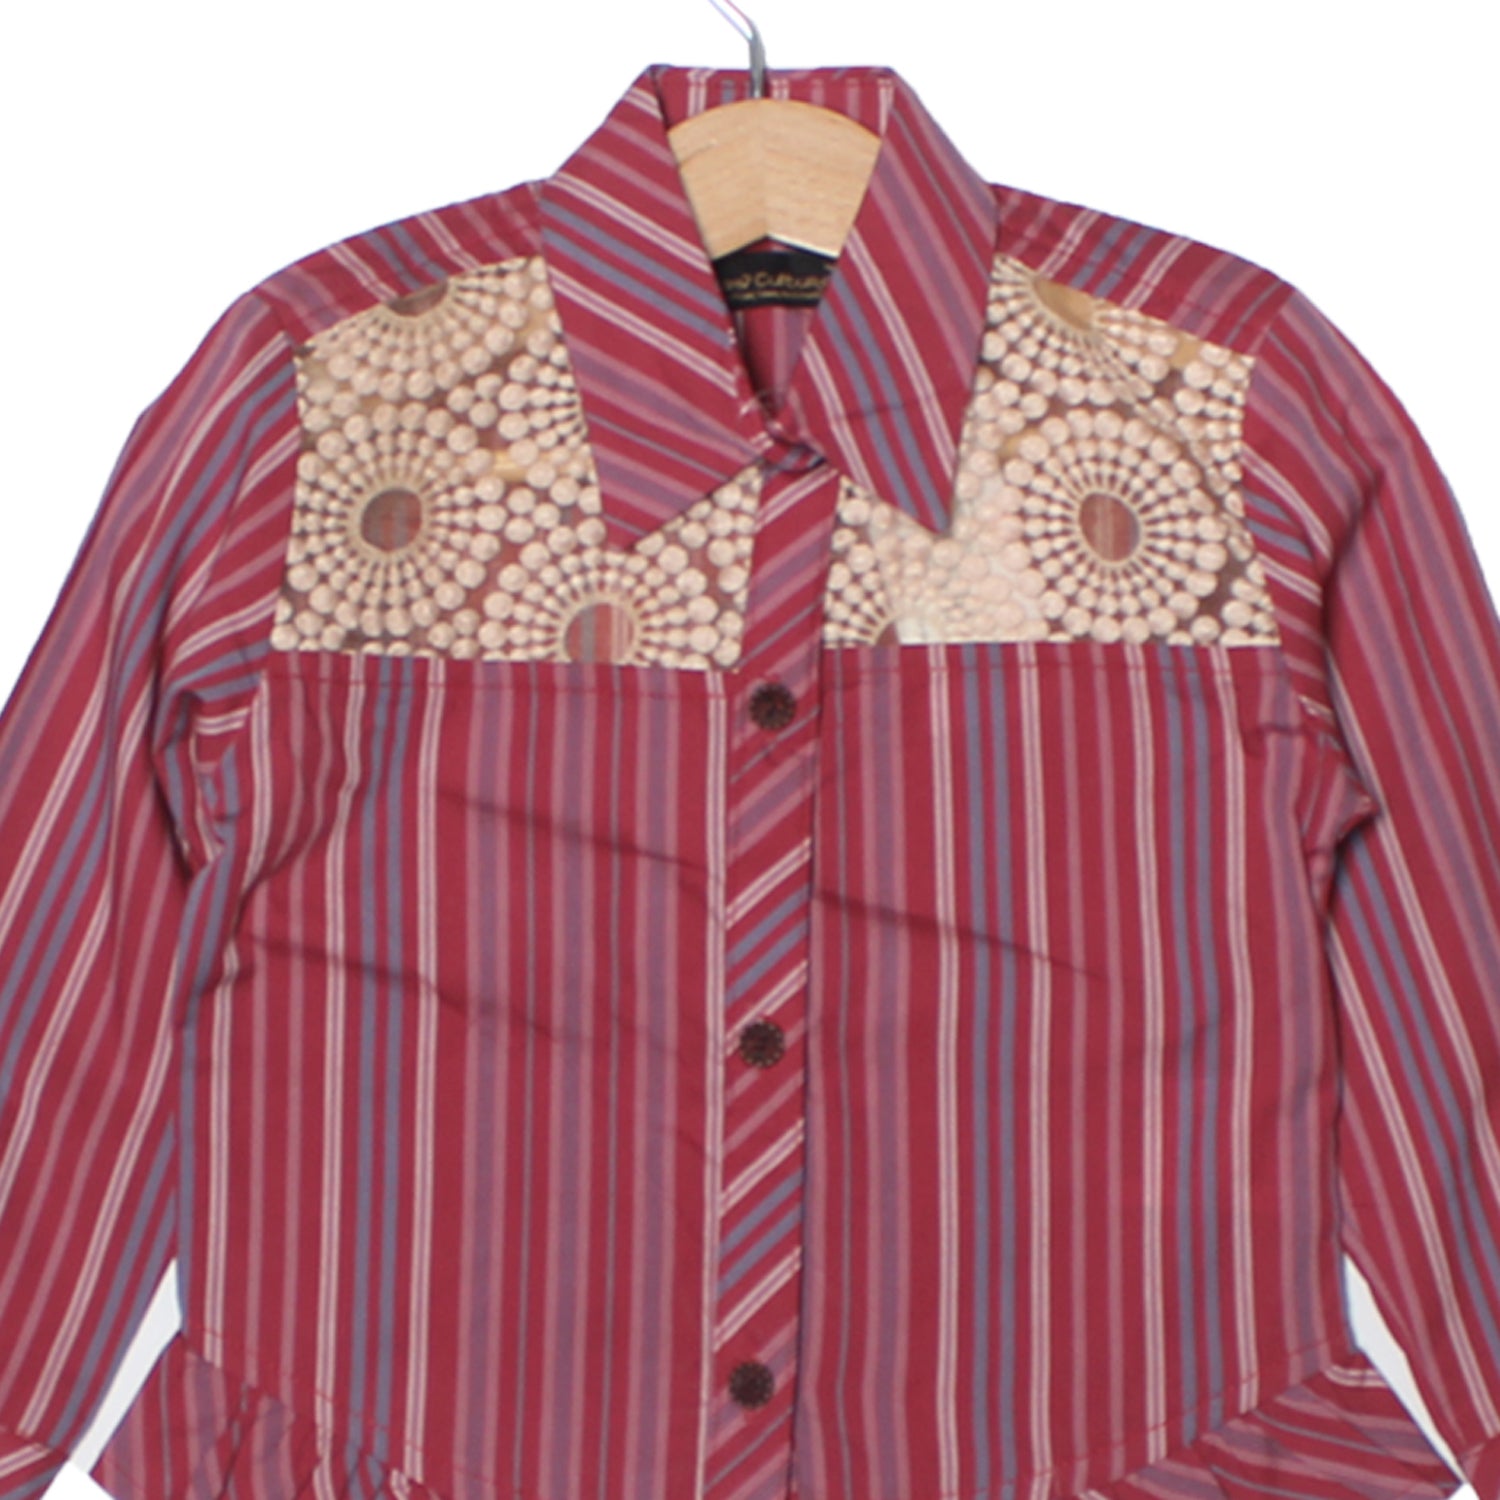 NEW MAROON LINES WITH EMBROIDERY CASUAL SHIRT FOR GIRLS